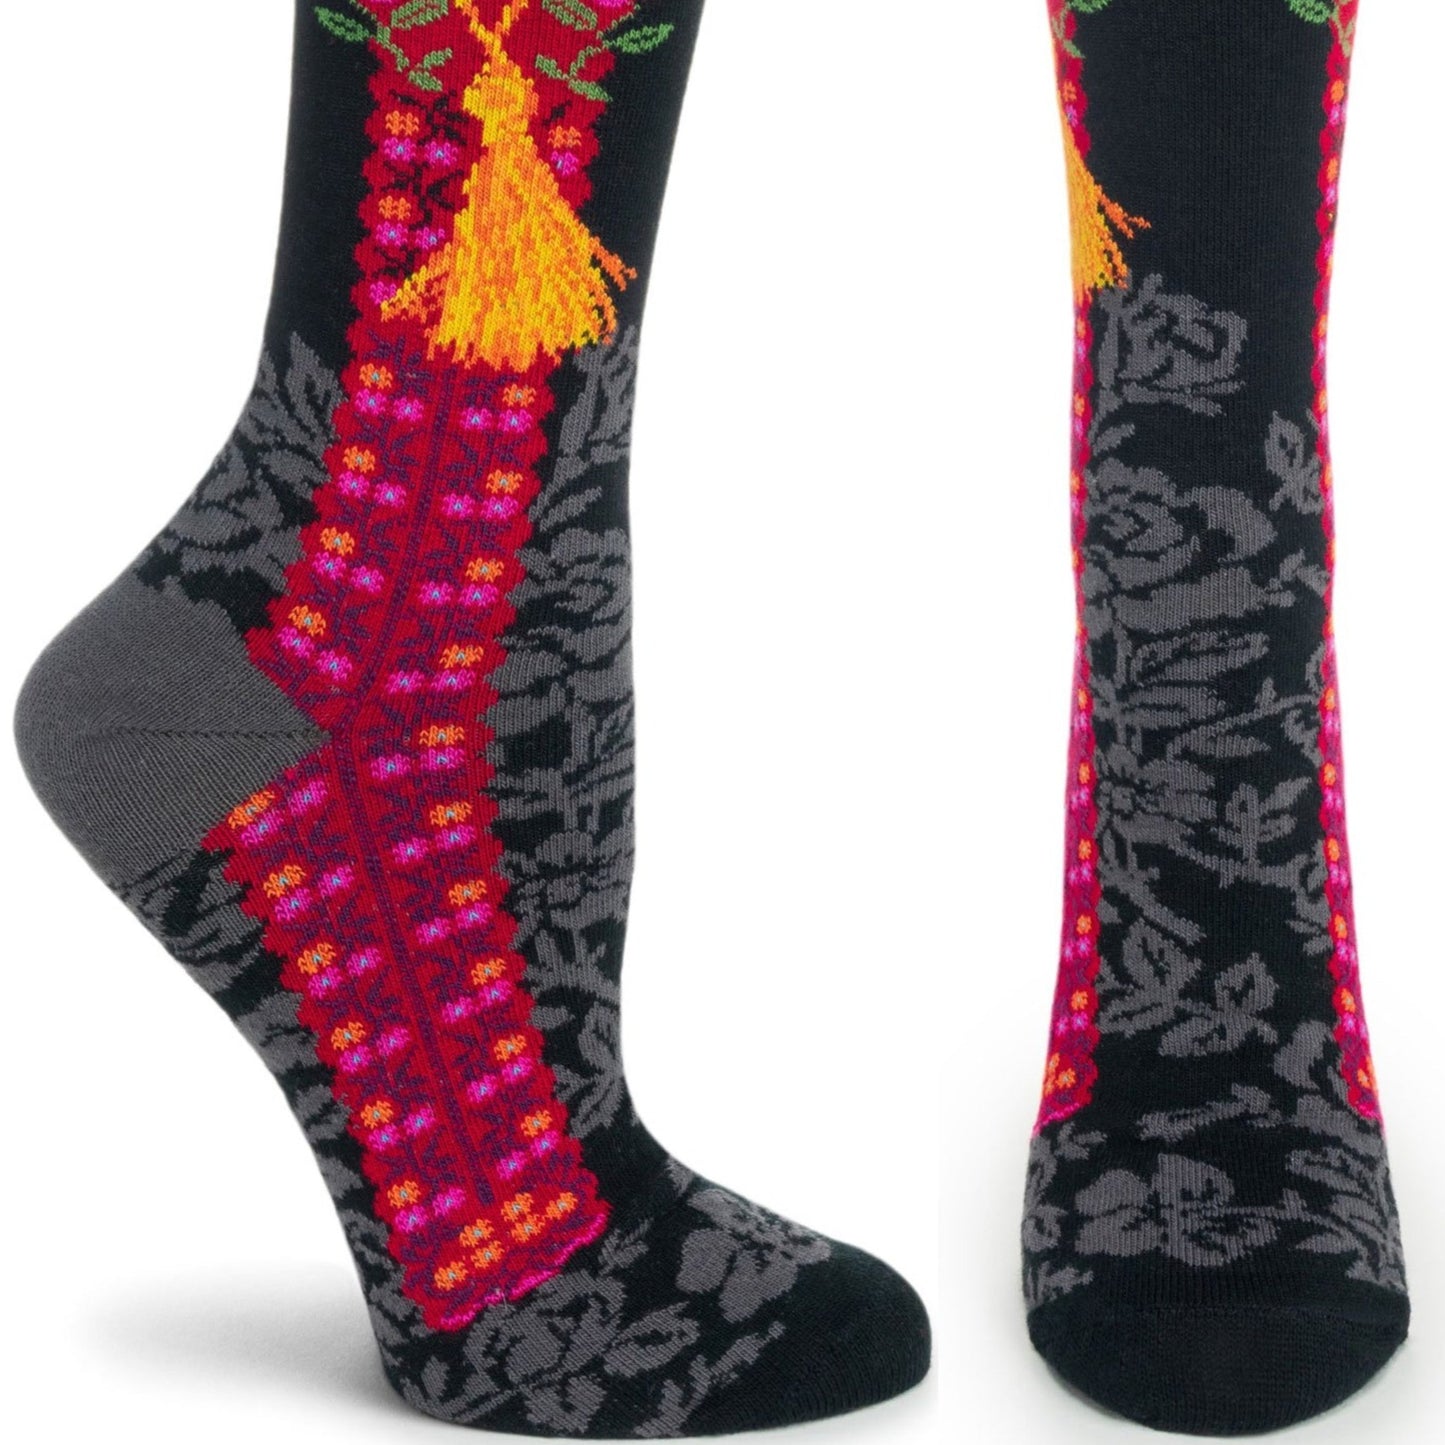 Women's Ozone Gold Tassel and Floral Crew Socks - Gray Pink